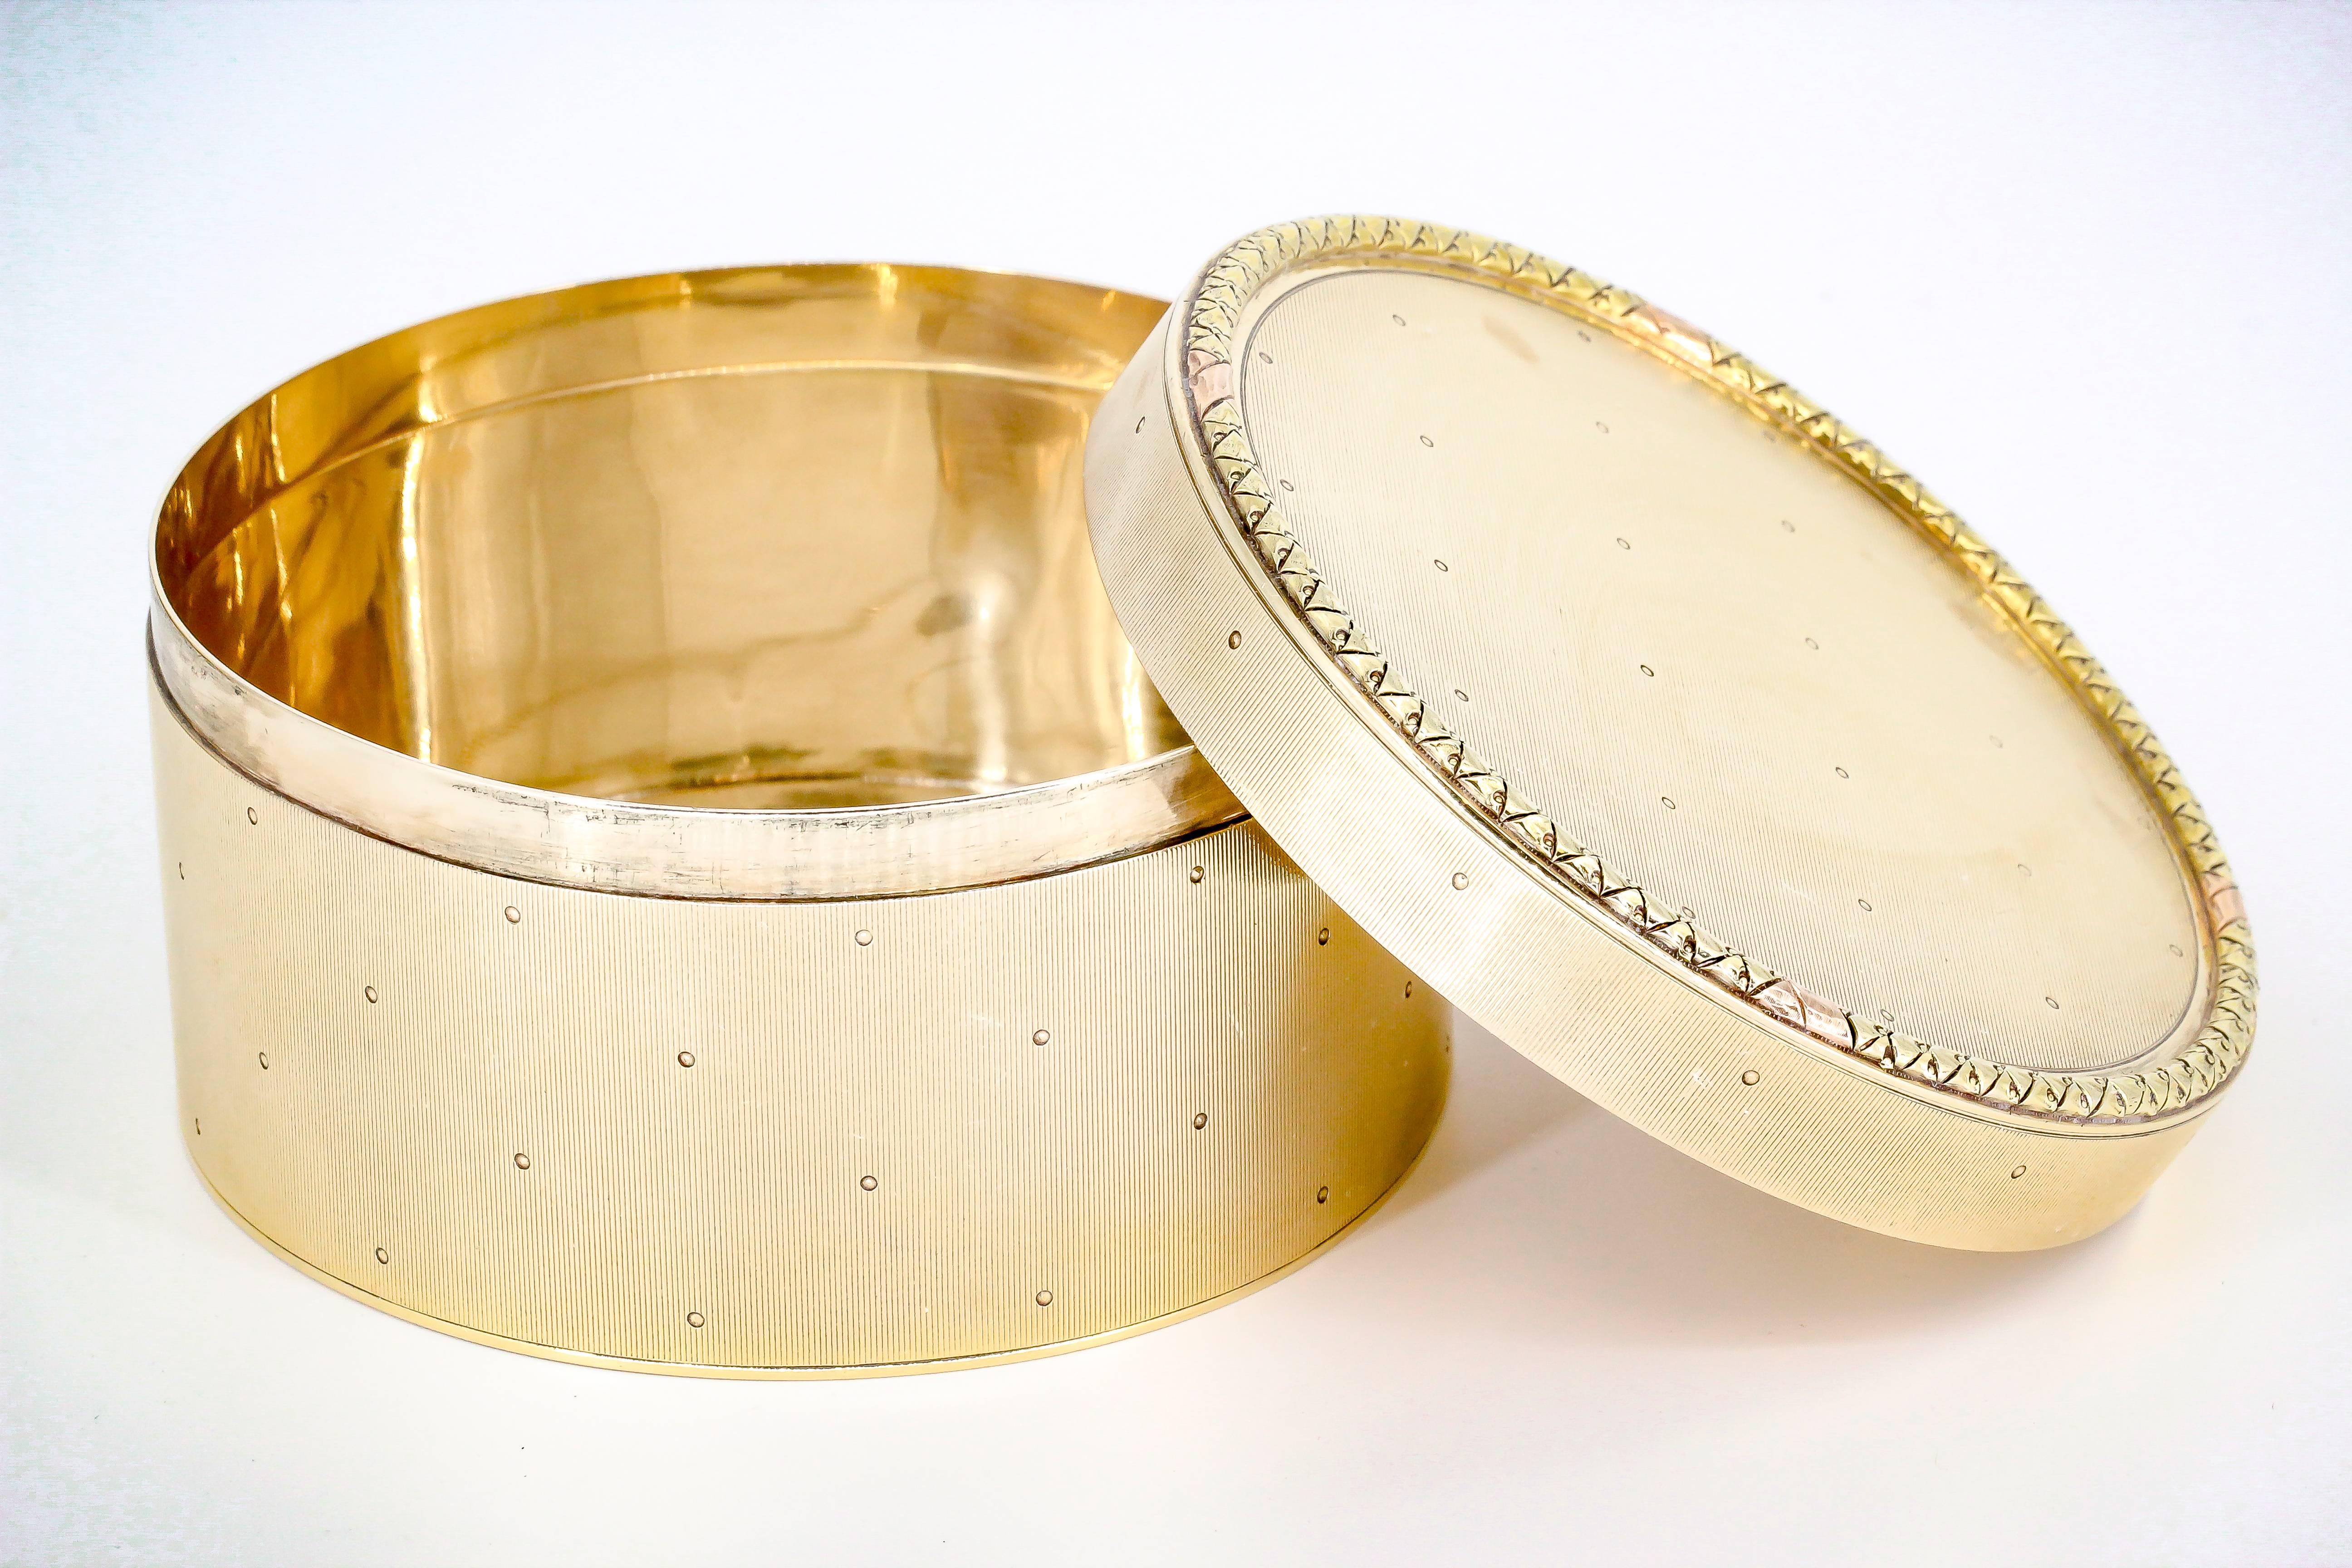 Elegant 14K yellow gold round box by Cartier, circa 1930s. It features a subtly ribbed surface with small dots throughout, and an intricate design around the outer edge of the top lid. Beautifully made and a great display piece.

Hallmarks: Cartier,